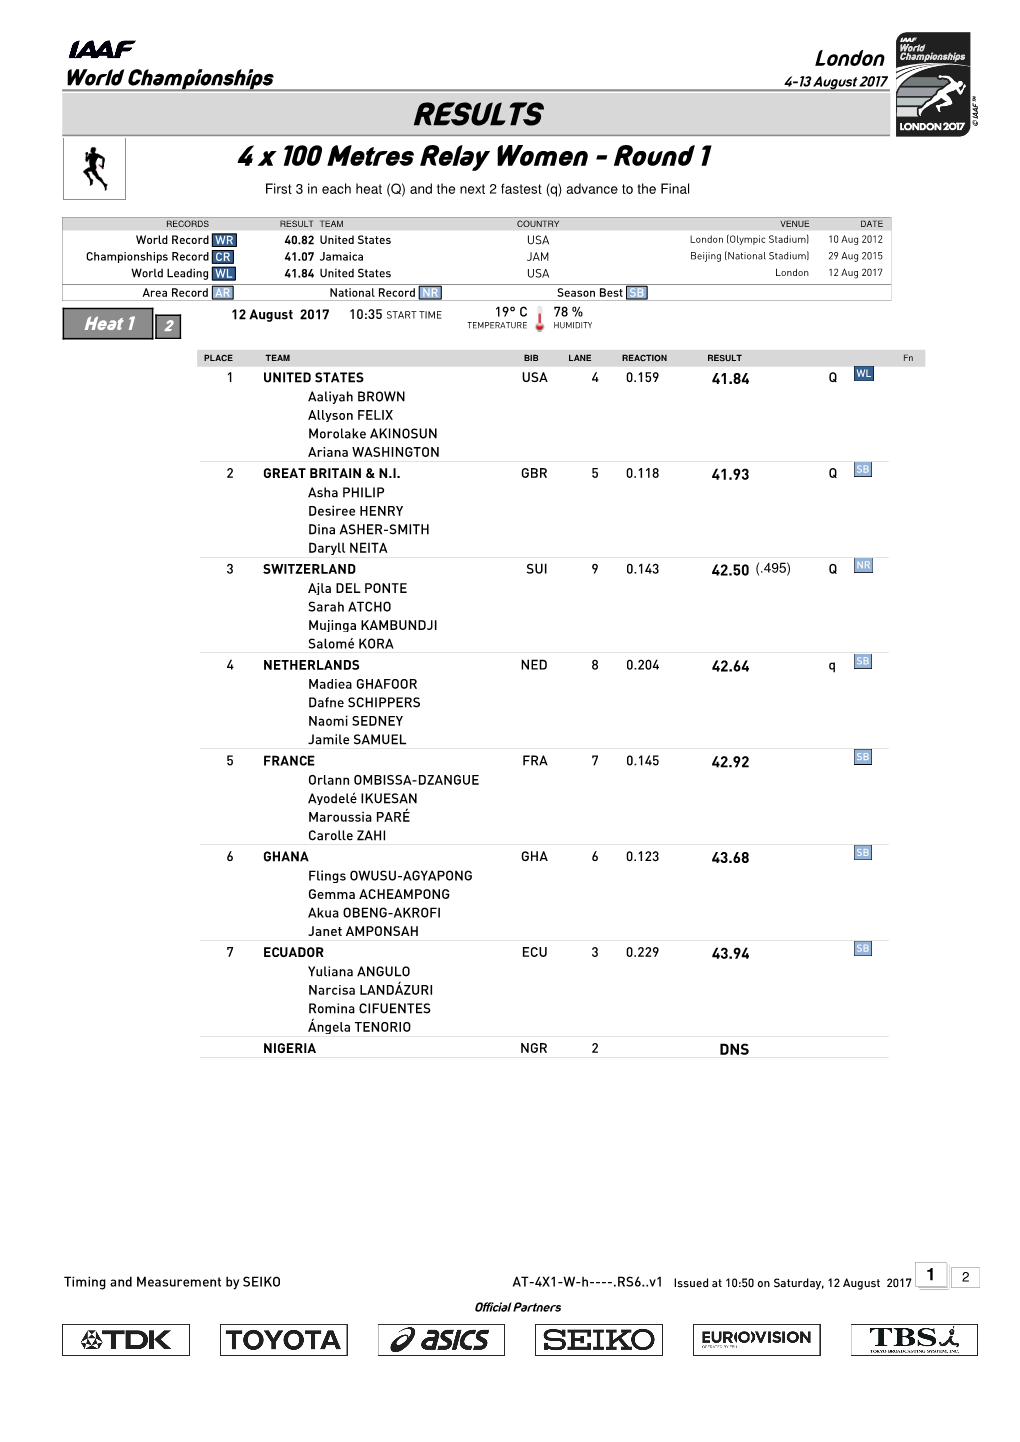 RESULTS 4 X 100 Metres Relay Women - Round 1 First 3 in Each Heat (Q) and the Next 2 Fastest (Q) Advance to the Final